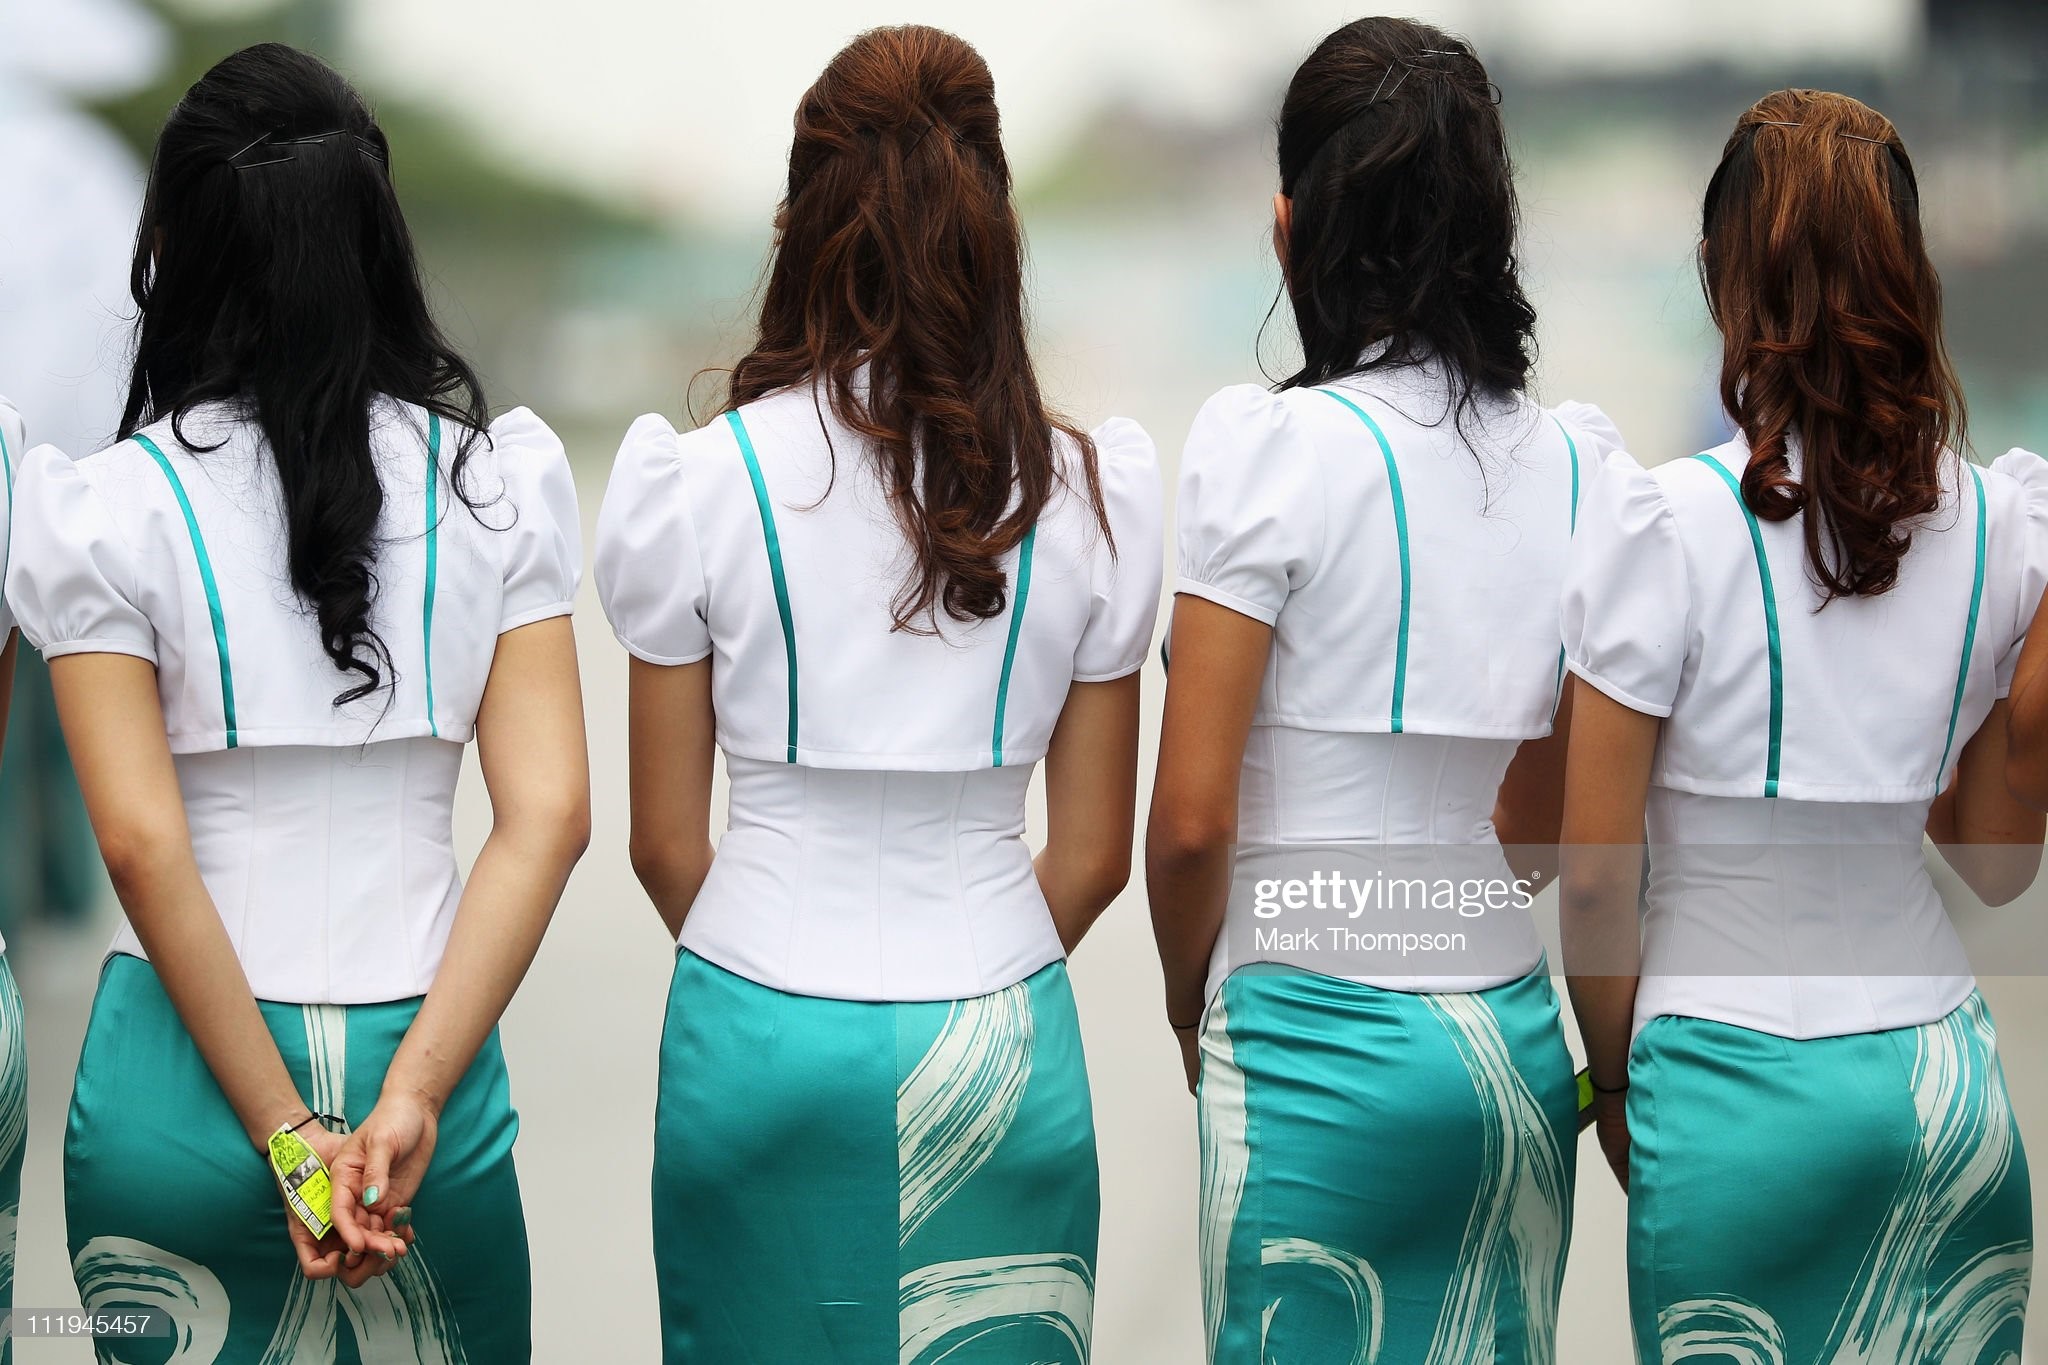 Grid girls are seen before the start of the Malaysian Formula One Grand Prix at the Sepang Circuit on April 10, 2011 in Kuala Lumpur, Malaysia. 